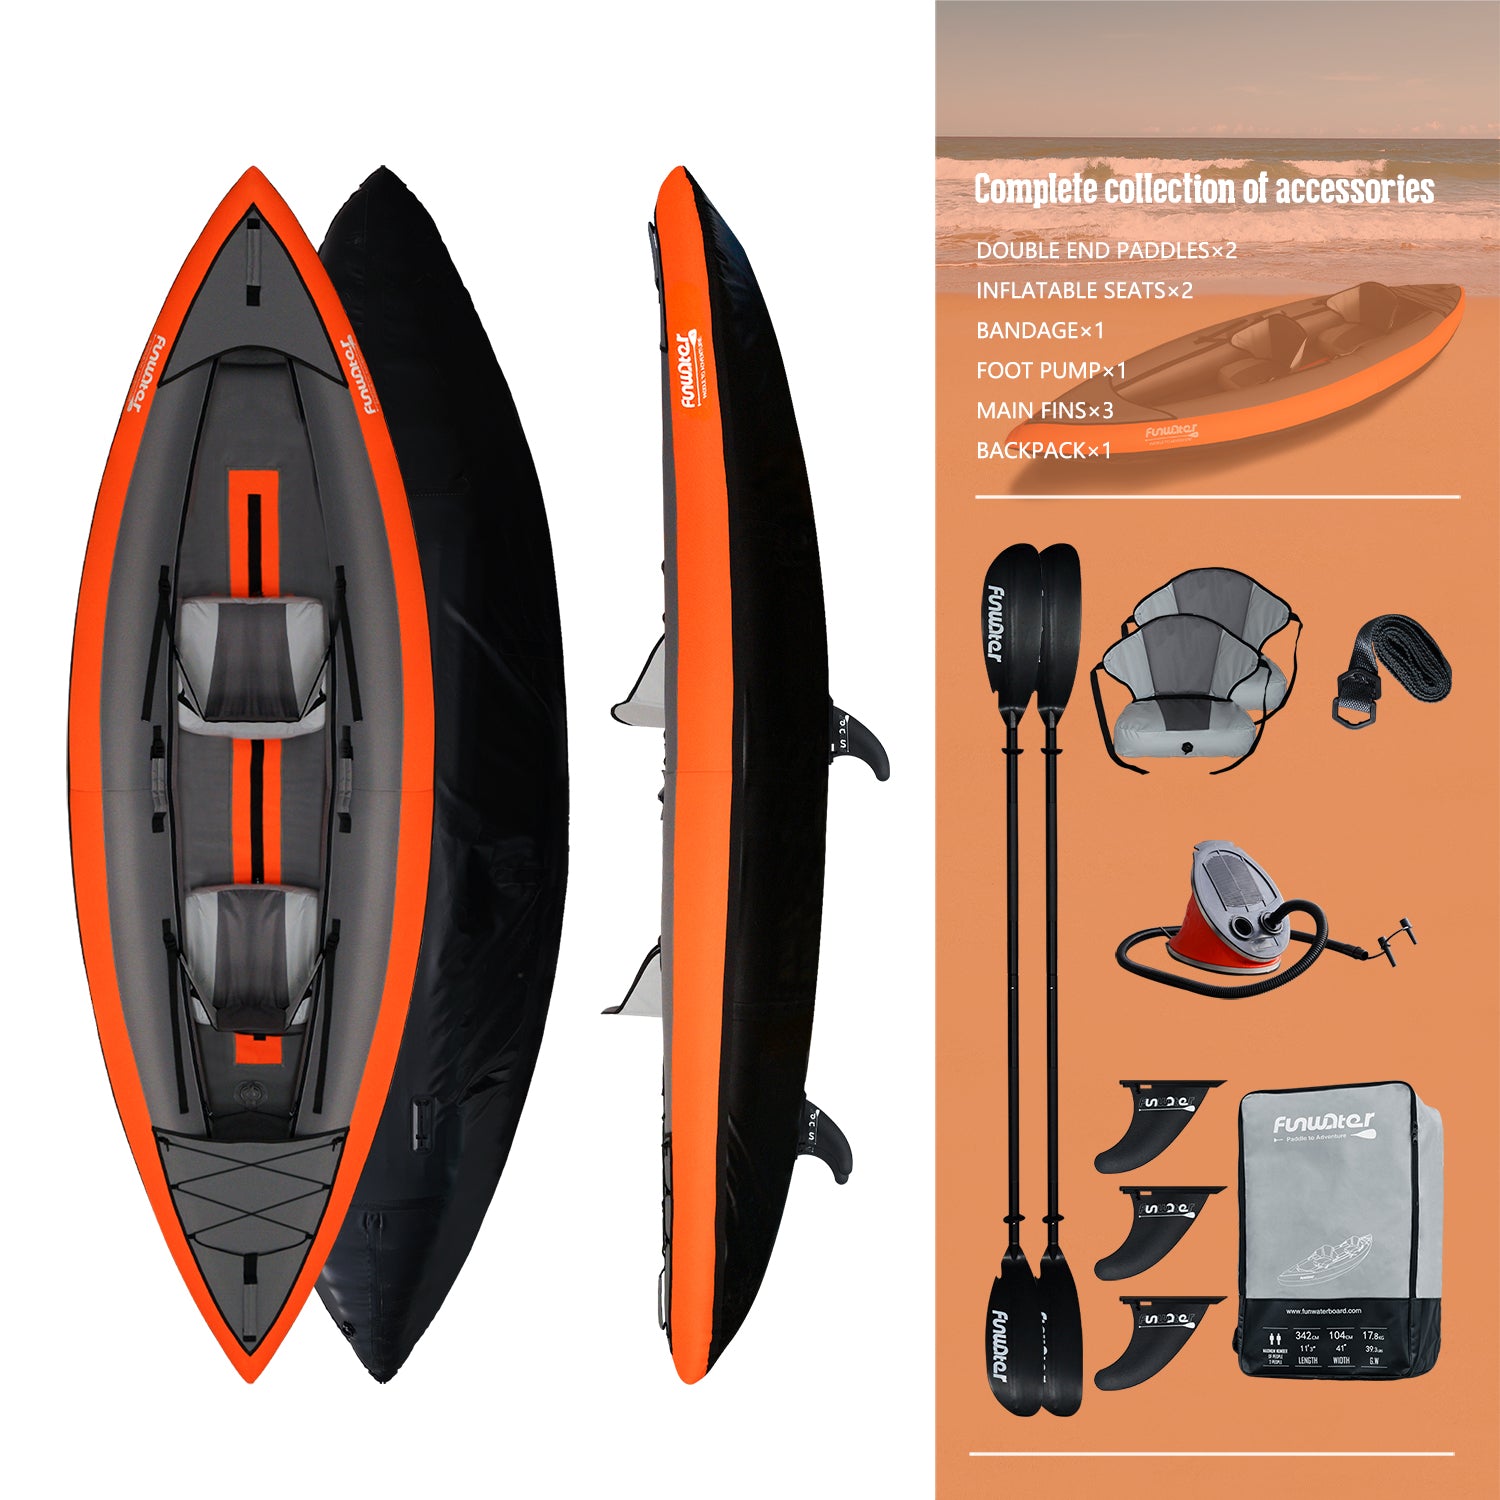 ROAMER 11' INFLATABLE KAYAK and accessories